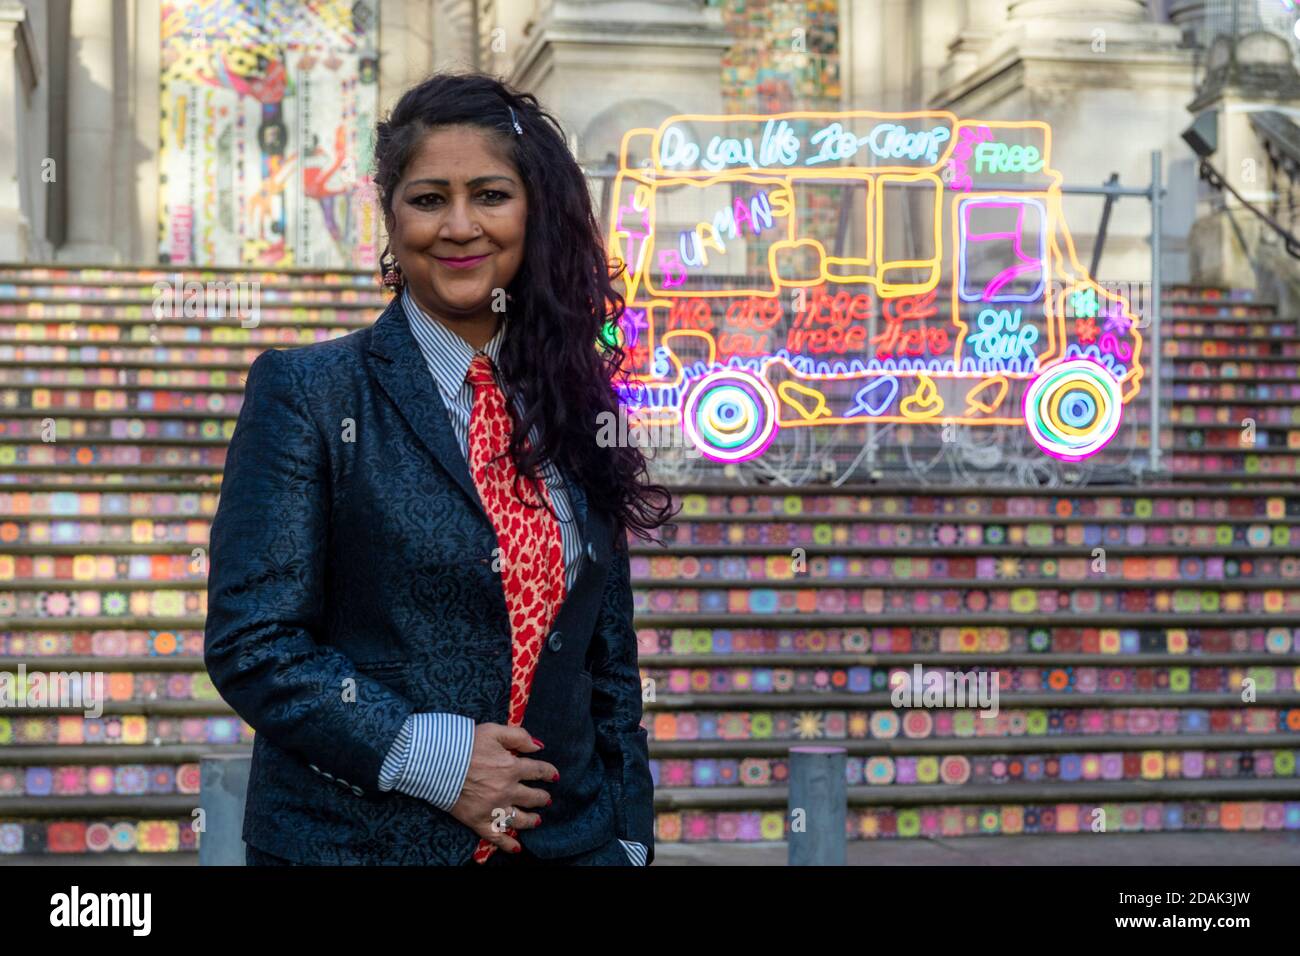 London, Britain. 13th Nov, 2020. Artist Chila Kumari Singh Burman poses for a photo in front of her art installation created for Tate Britain's annual Winter Commission at Tate Britain in London, Britain, Nov. 13, 2020. Chila Kumari Singh Burman created a technicolour installation for Tate Britain's iconic facade. This is the fourth in Tate Britain's series of outdoor commissions to mark the winter season. Credit: Ray Tang/Xinhua/Alamy Live News Stock Photo